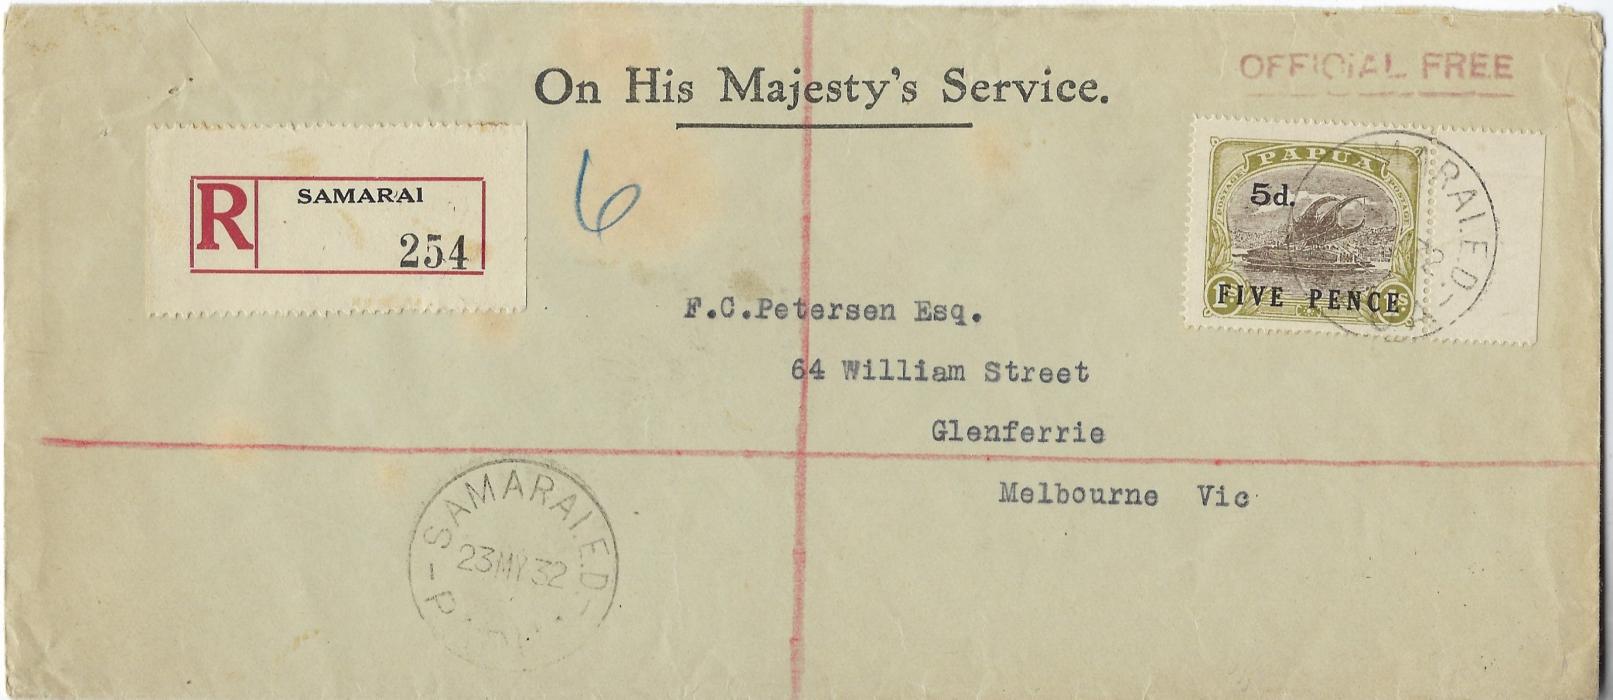 Papua 1932 (23 MY) registered OHMS cover to Melbourne with handstamp at top right ‘OFFICIAL FREE’ and franked 5d on 1s marginal cancelled by Samarai cds, repeated to left under registration etiquette, further cds on reverse together with Melbourne and Hawthorn cancels.